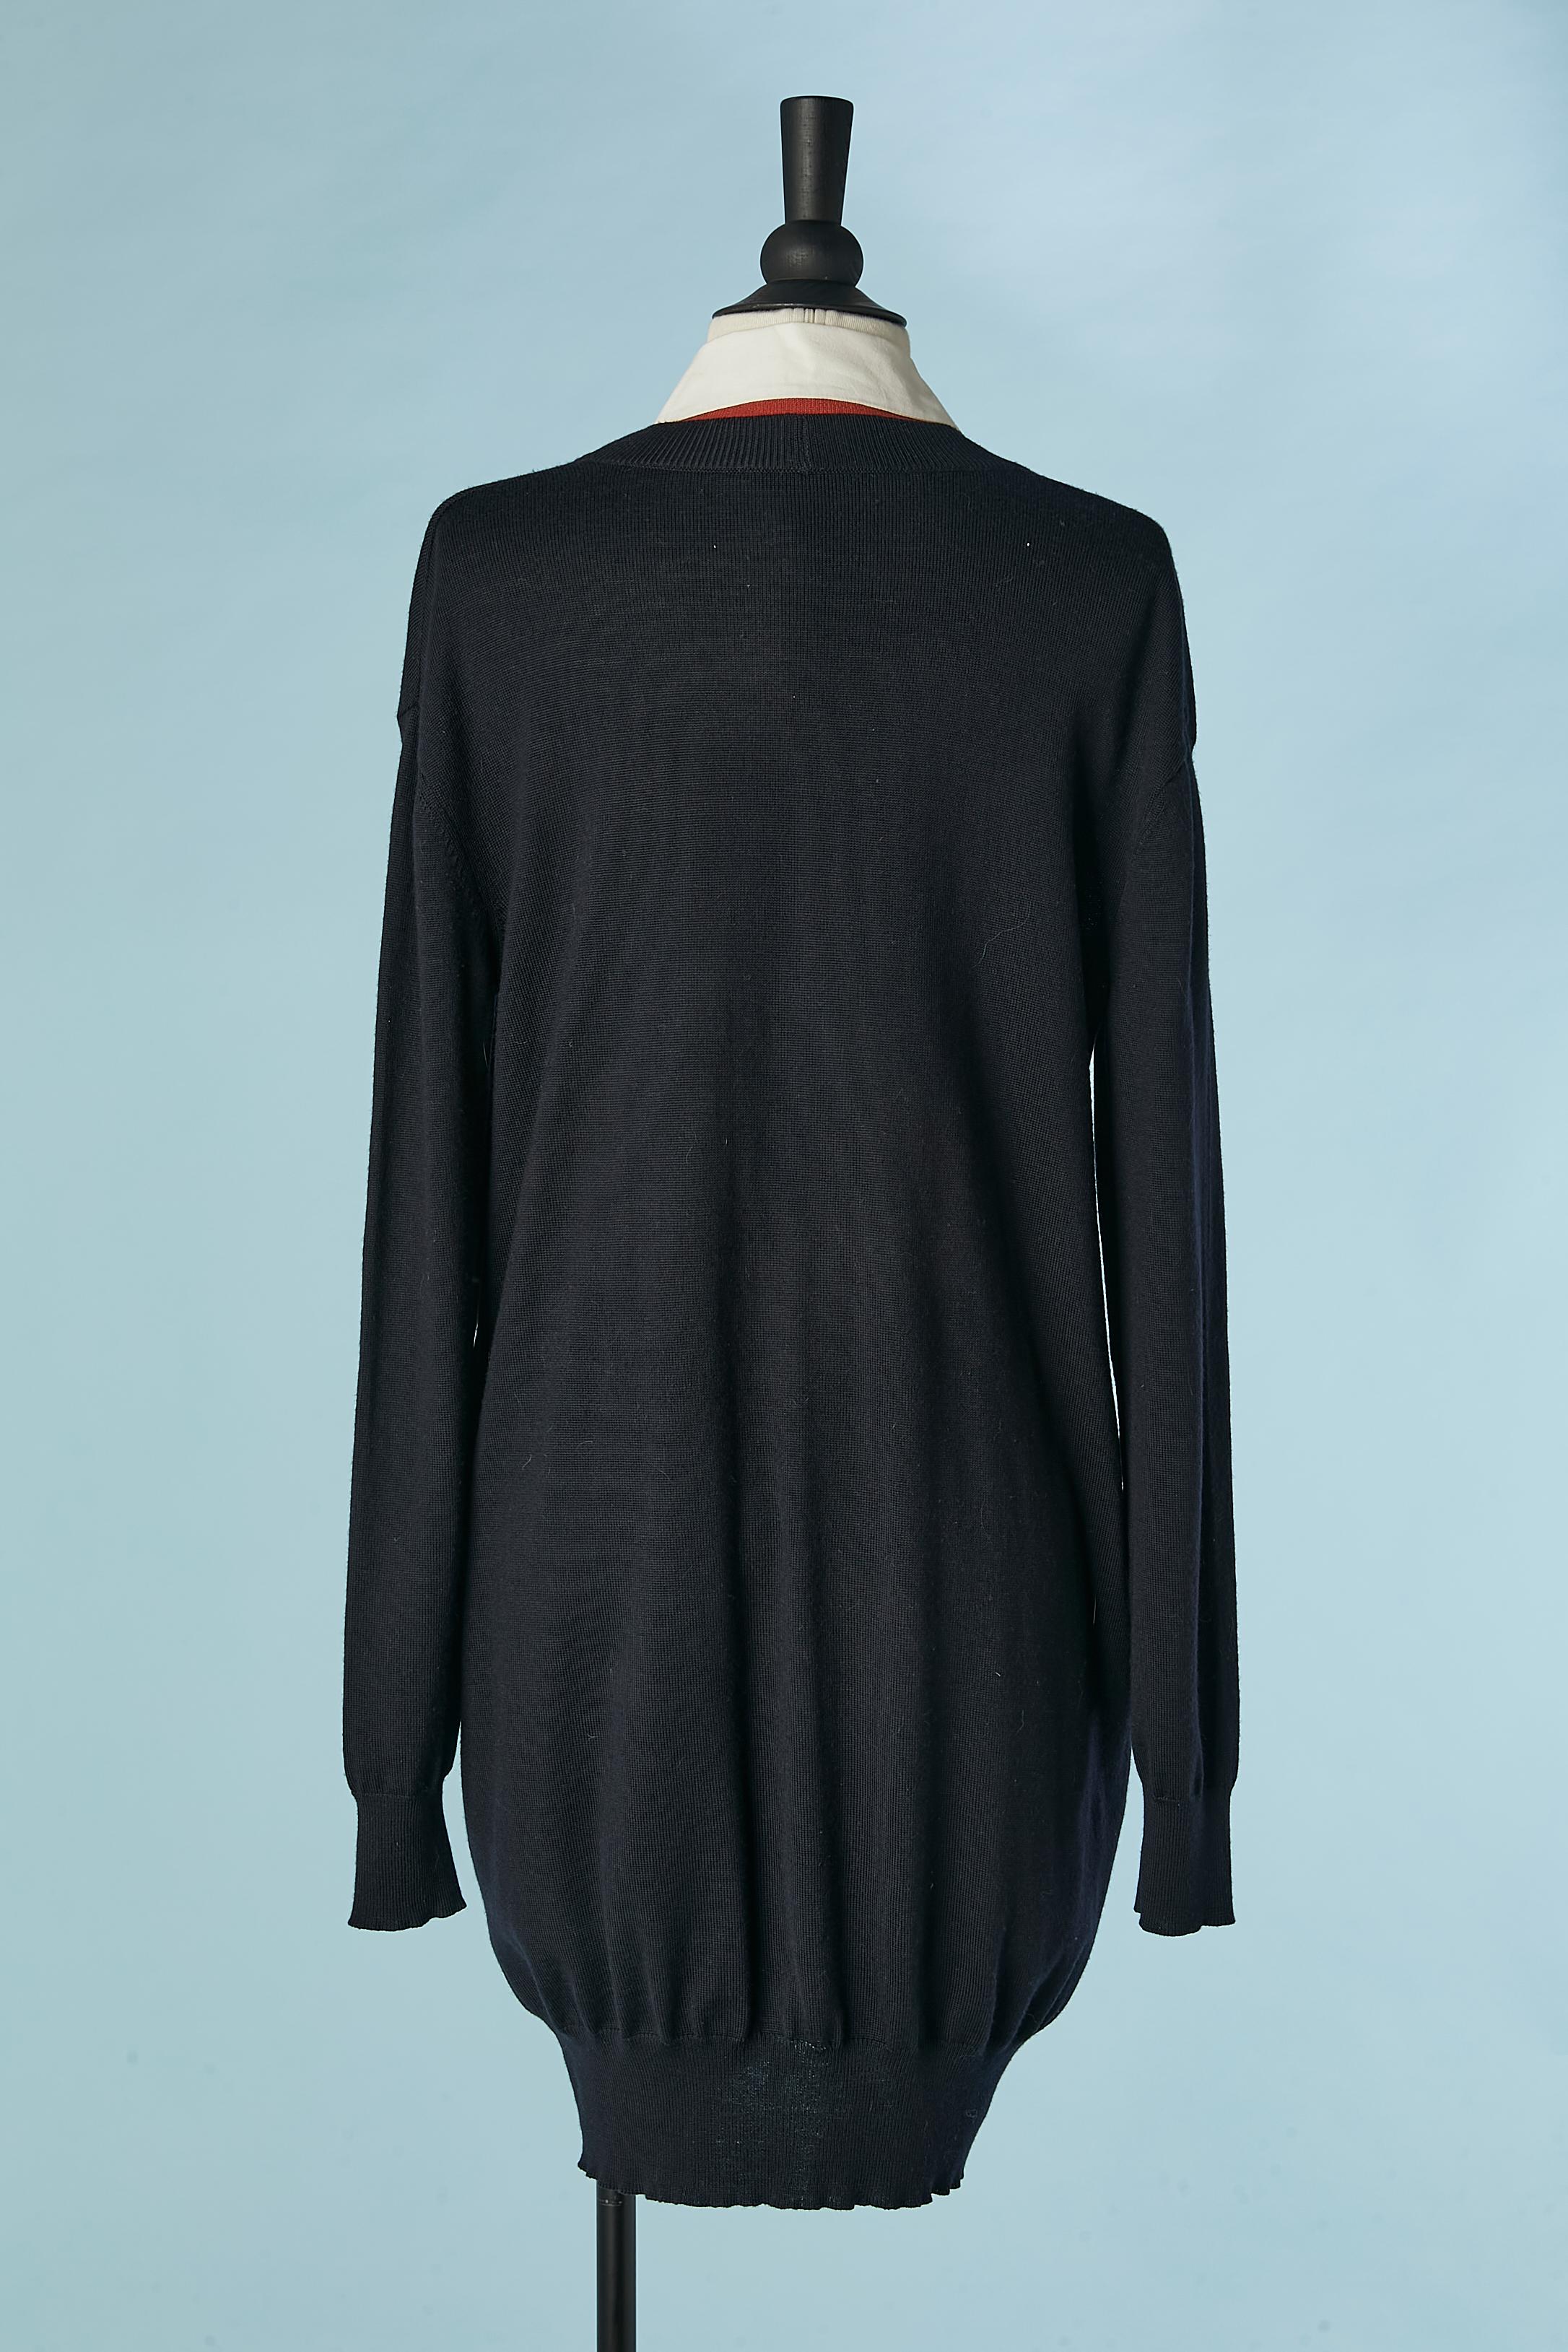 Trompe l'oeil oversize sweater with detachable shirt collar Alexander McQueen  For Sale 1